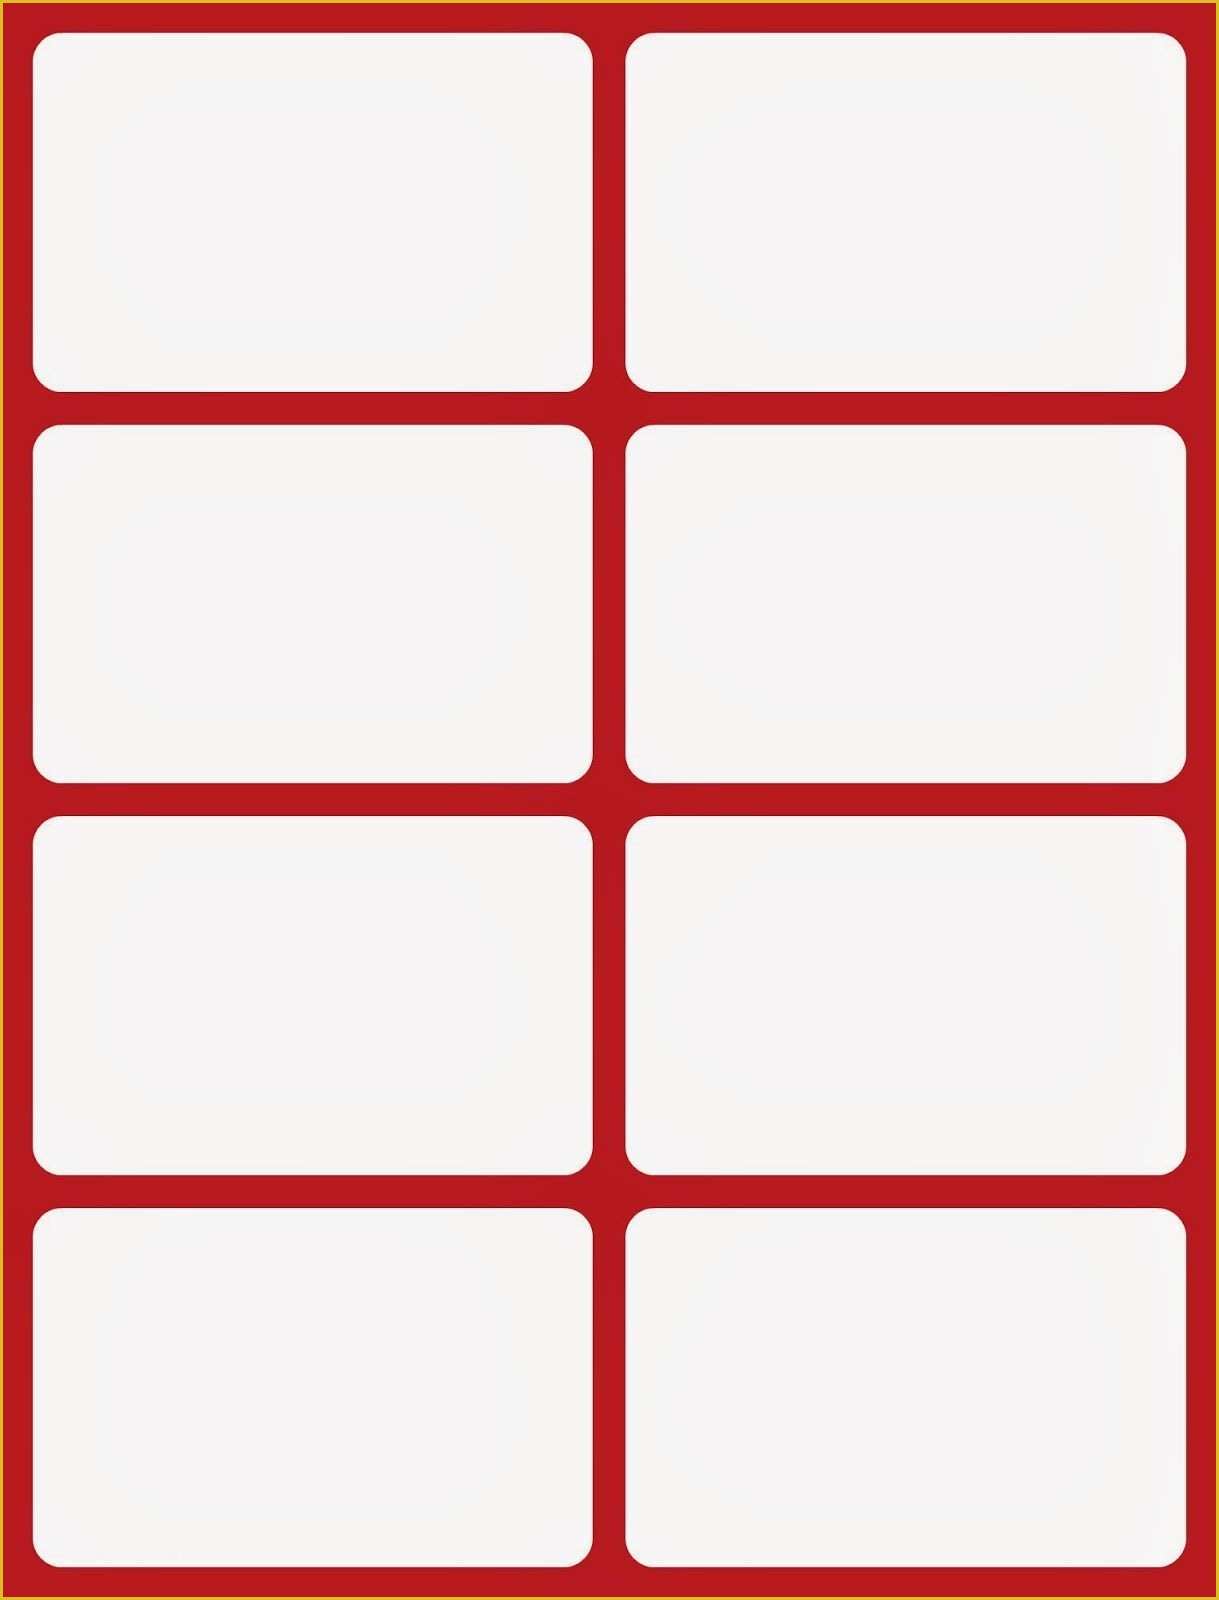 Loyalty Card Template Free Microsoft Word Of Unique Flash Card Template